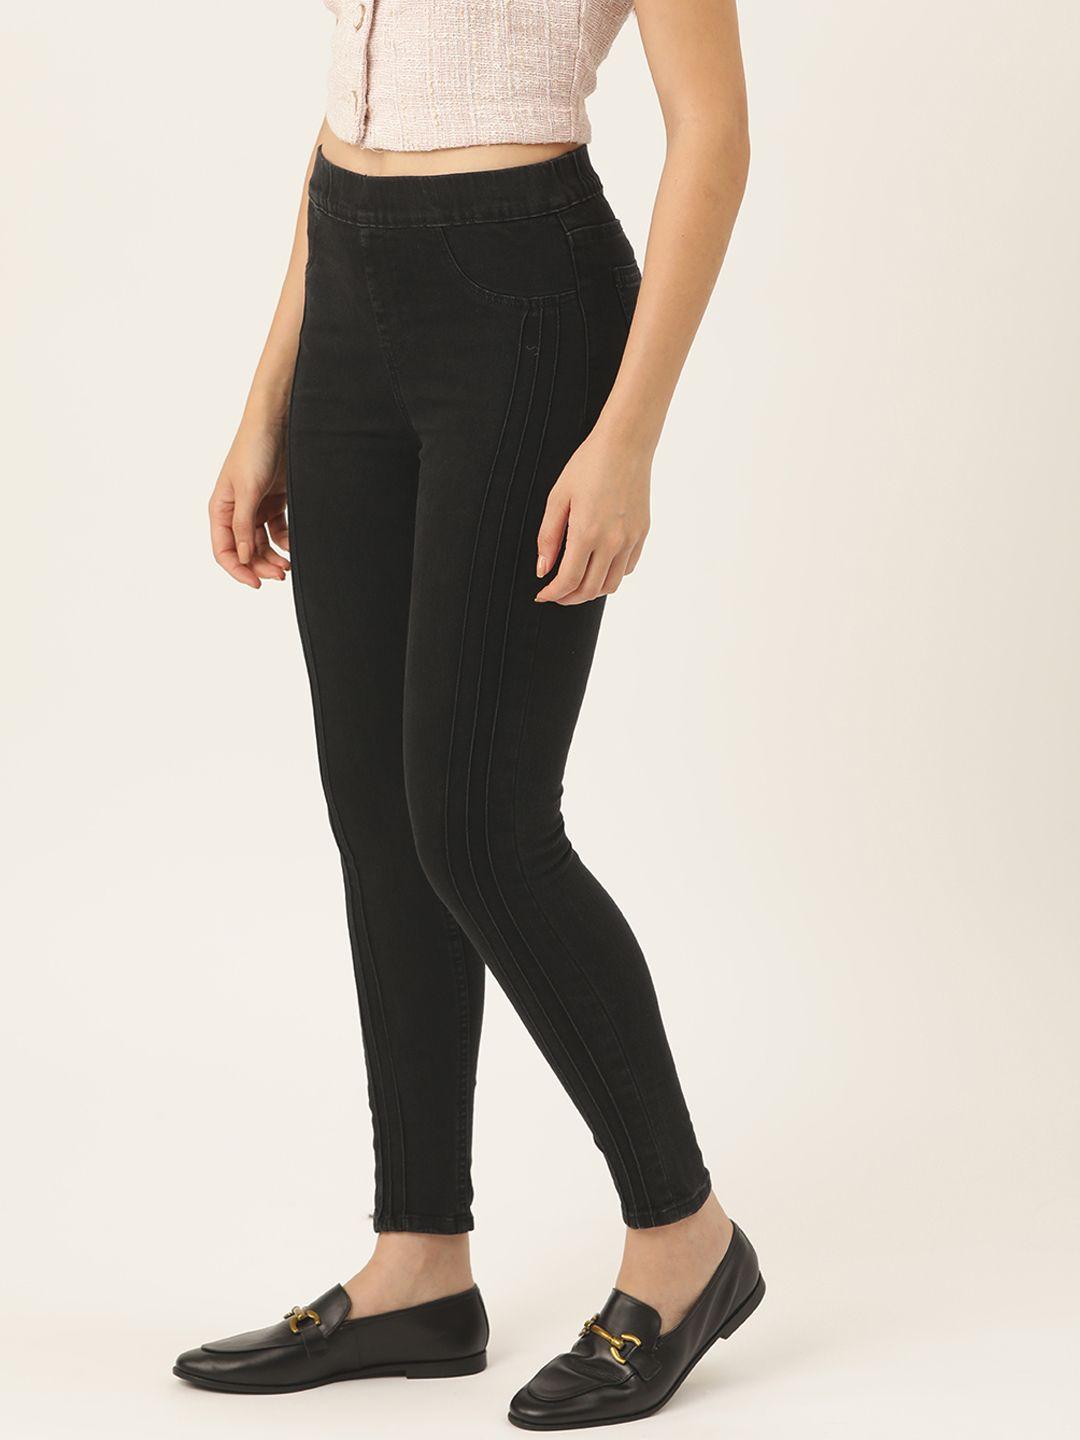 dressberry-women-super-skinny-fit-high-rise-solid-jeggings